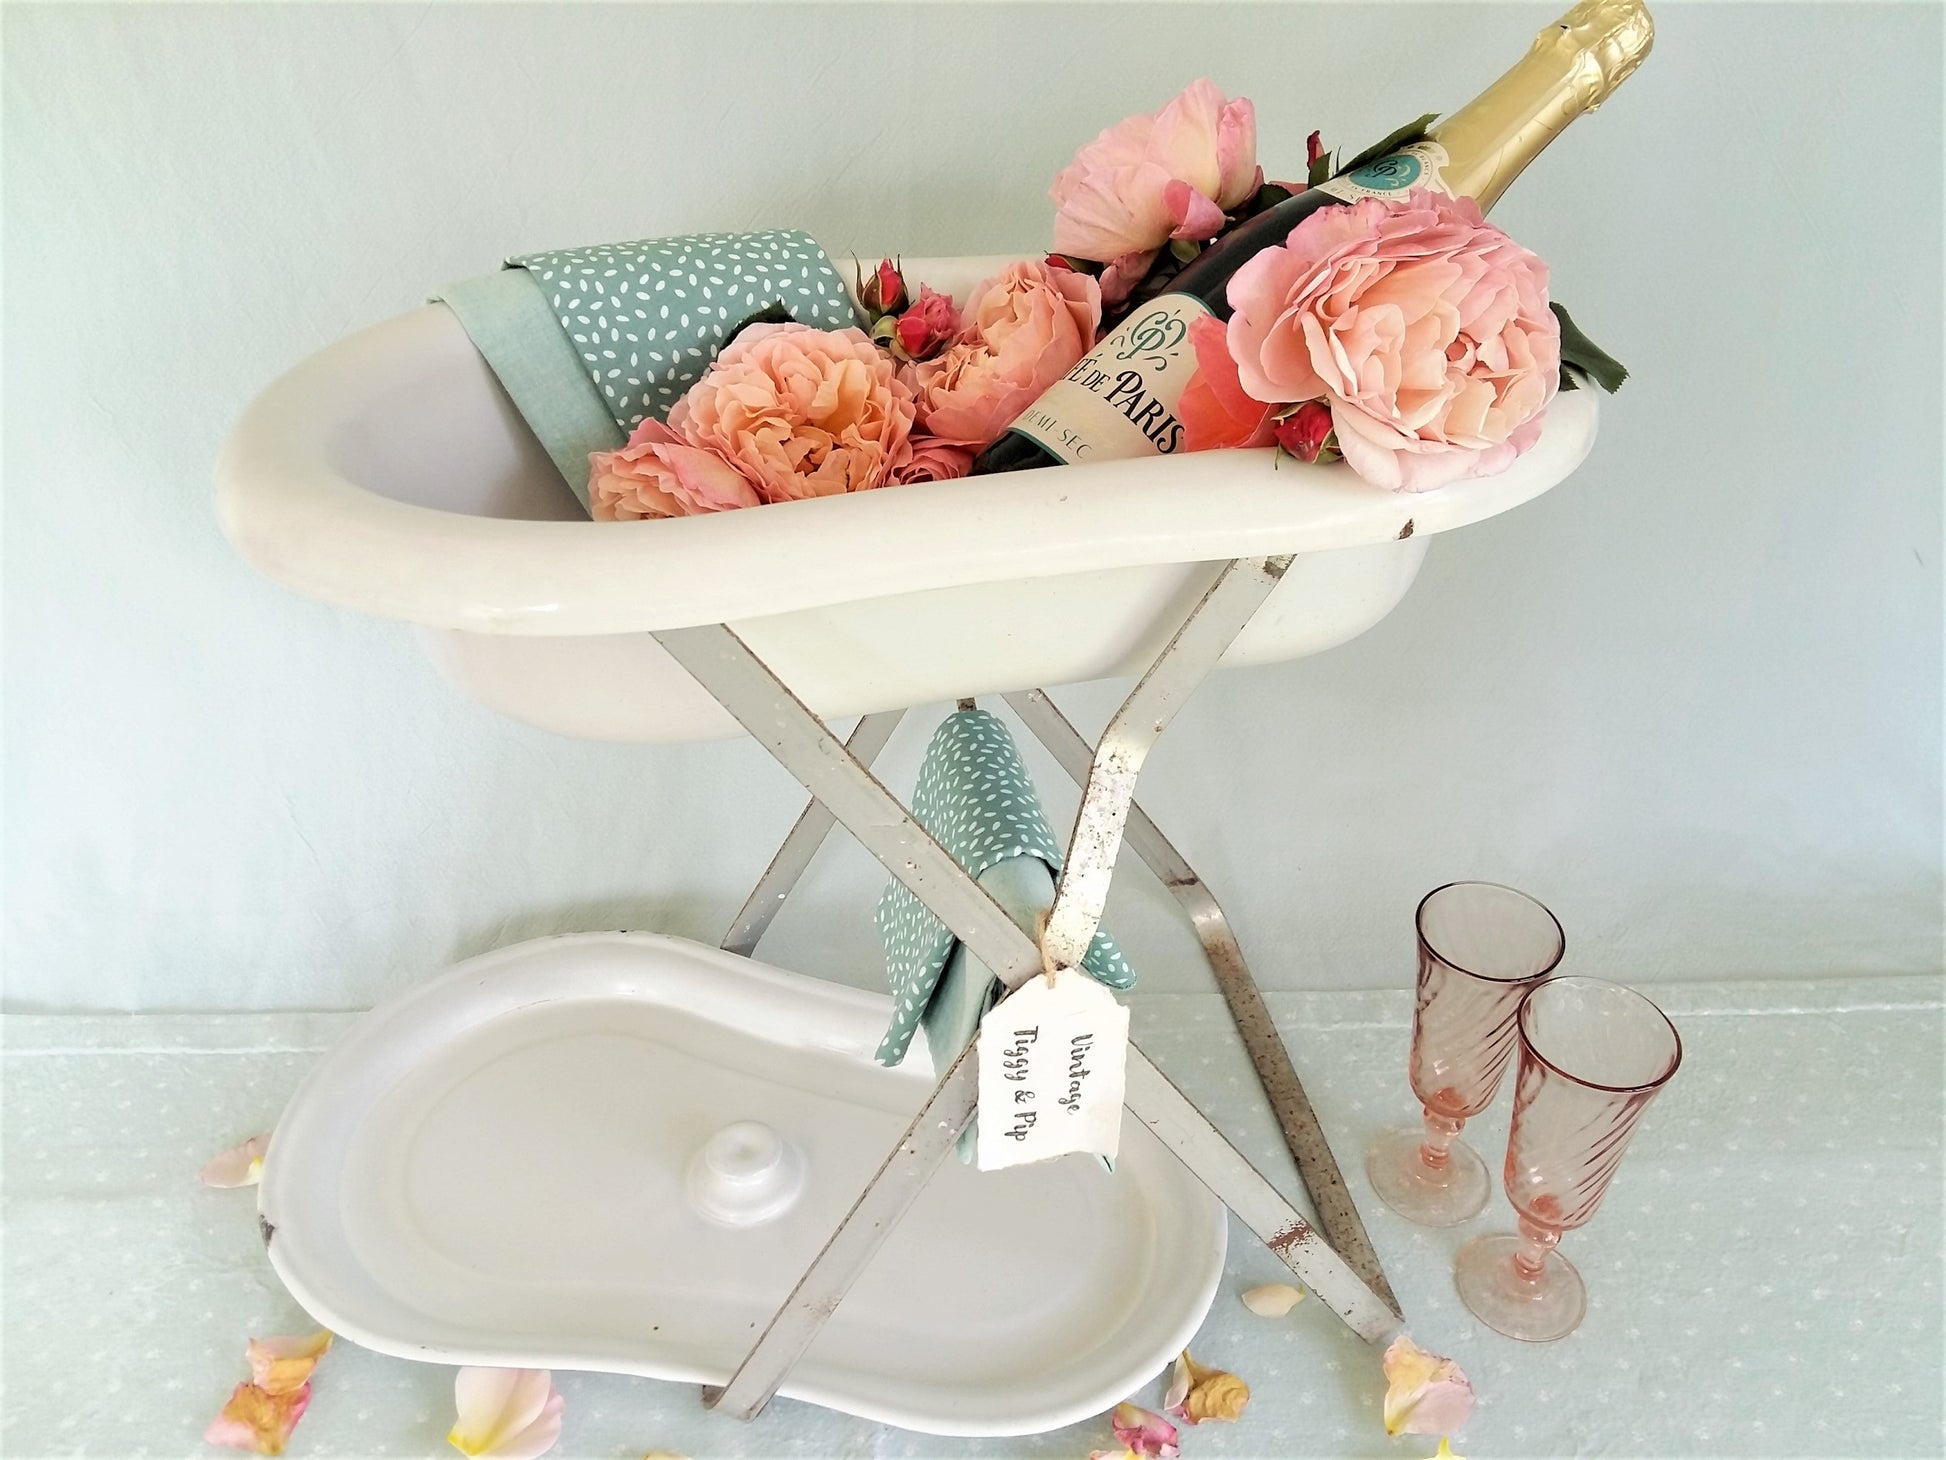 Enamel Baby Bath Tub with Lid, on Stand. from Tiggy & Pip - Just €260! Shop now at Tiggy and Pip